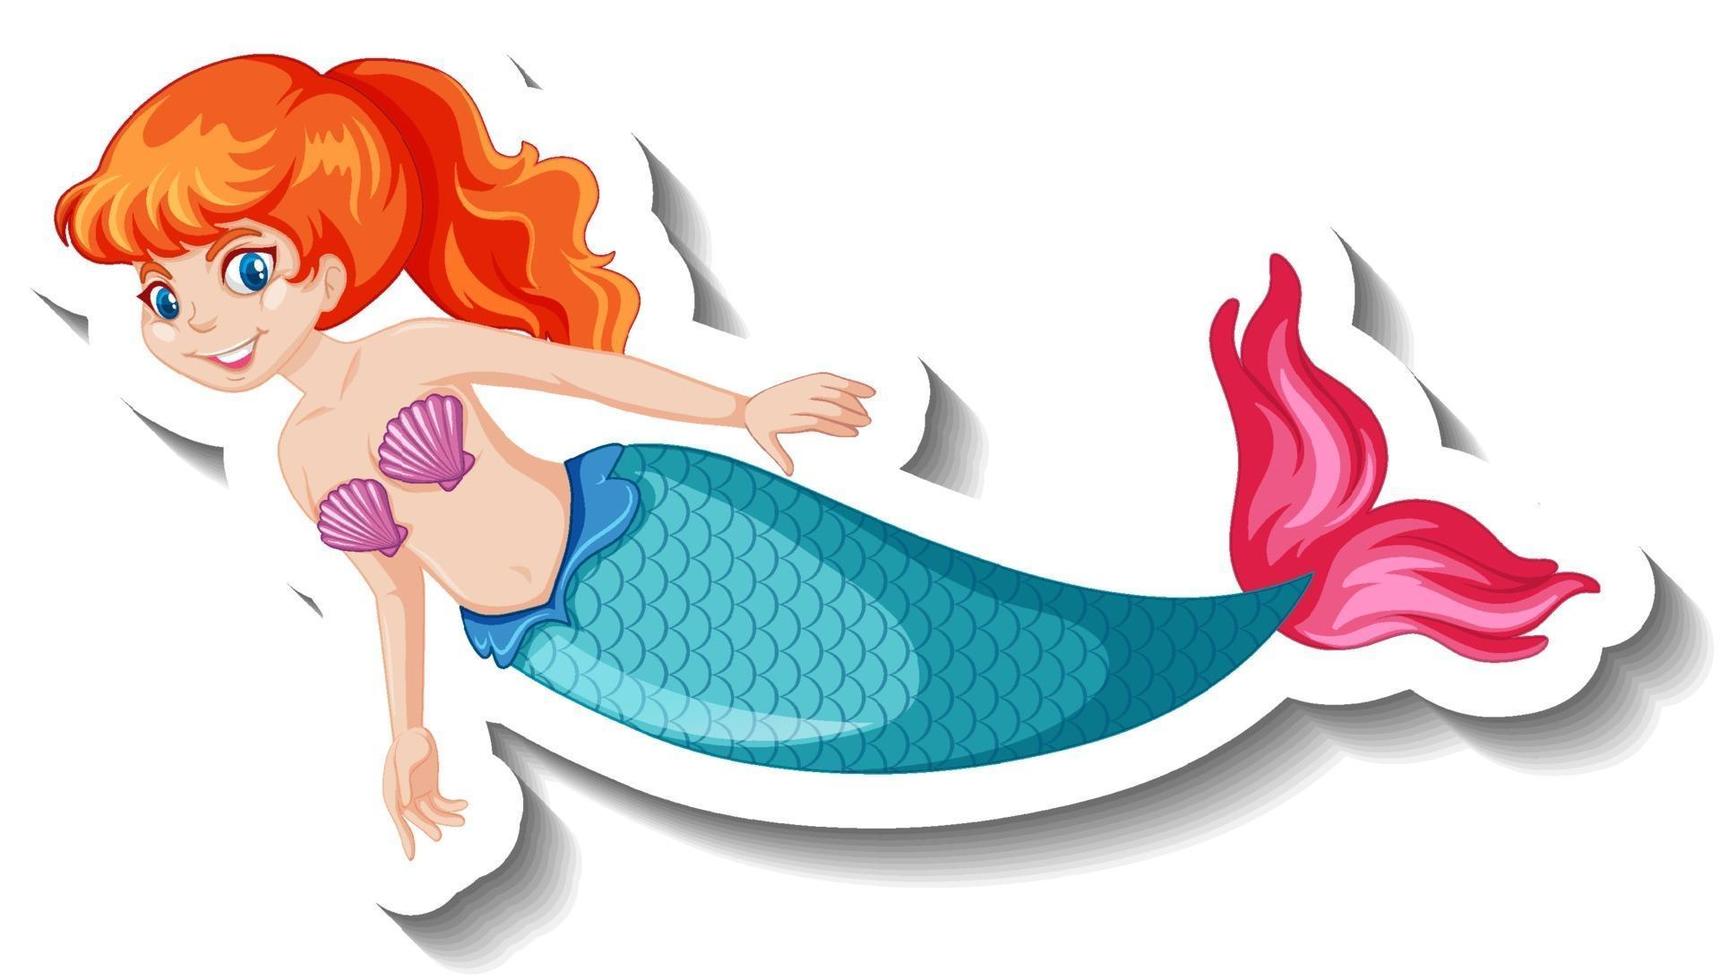 A sticker template with cute mermaid cartoon character vector